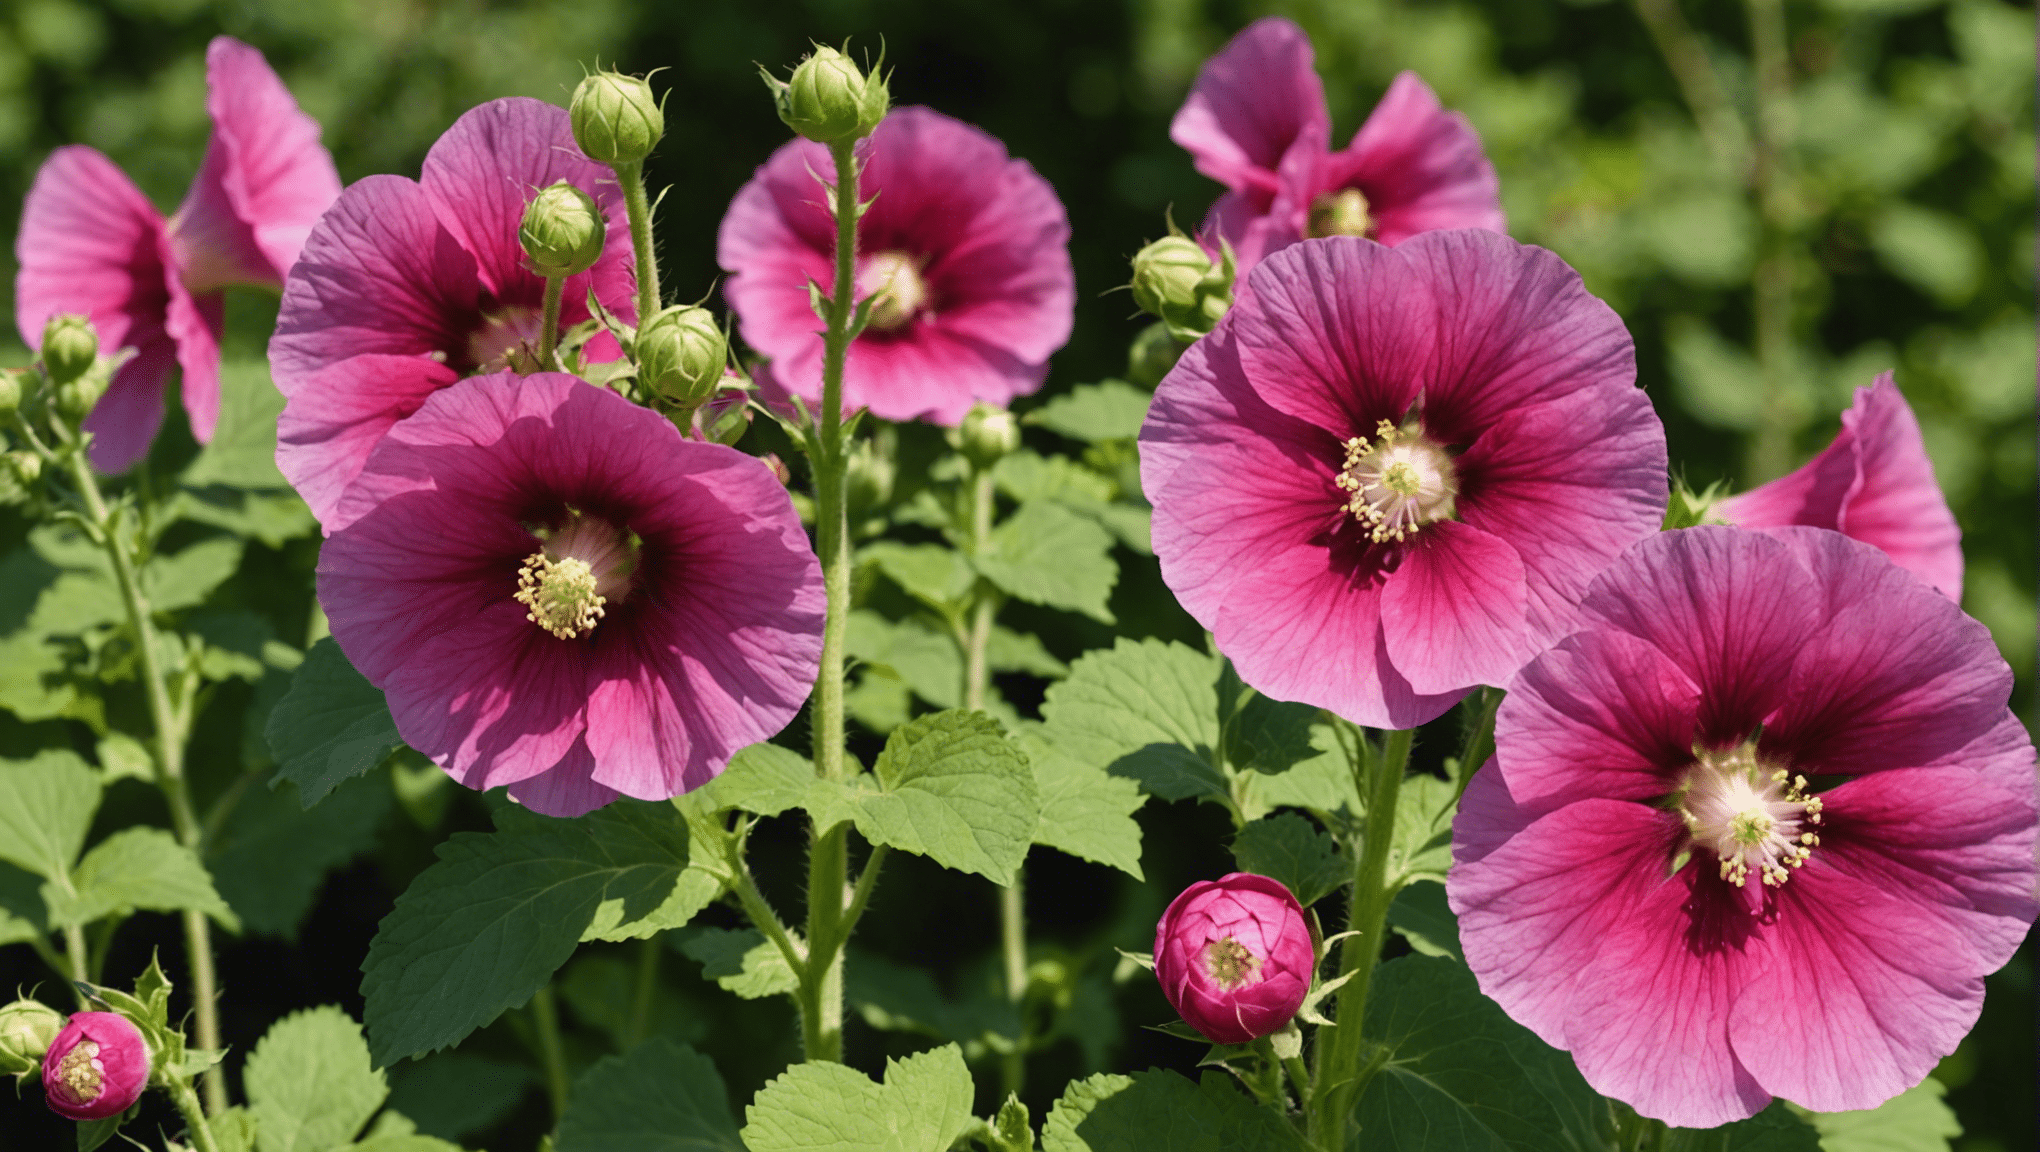 learn how to plant and grow hollyhock seeds with our step-by-step guide. find expert tips and advice for successful hollyhock seed planting and growth.